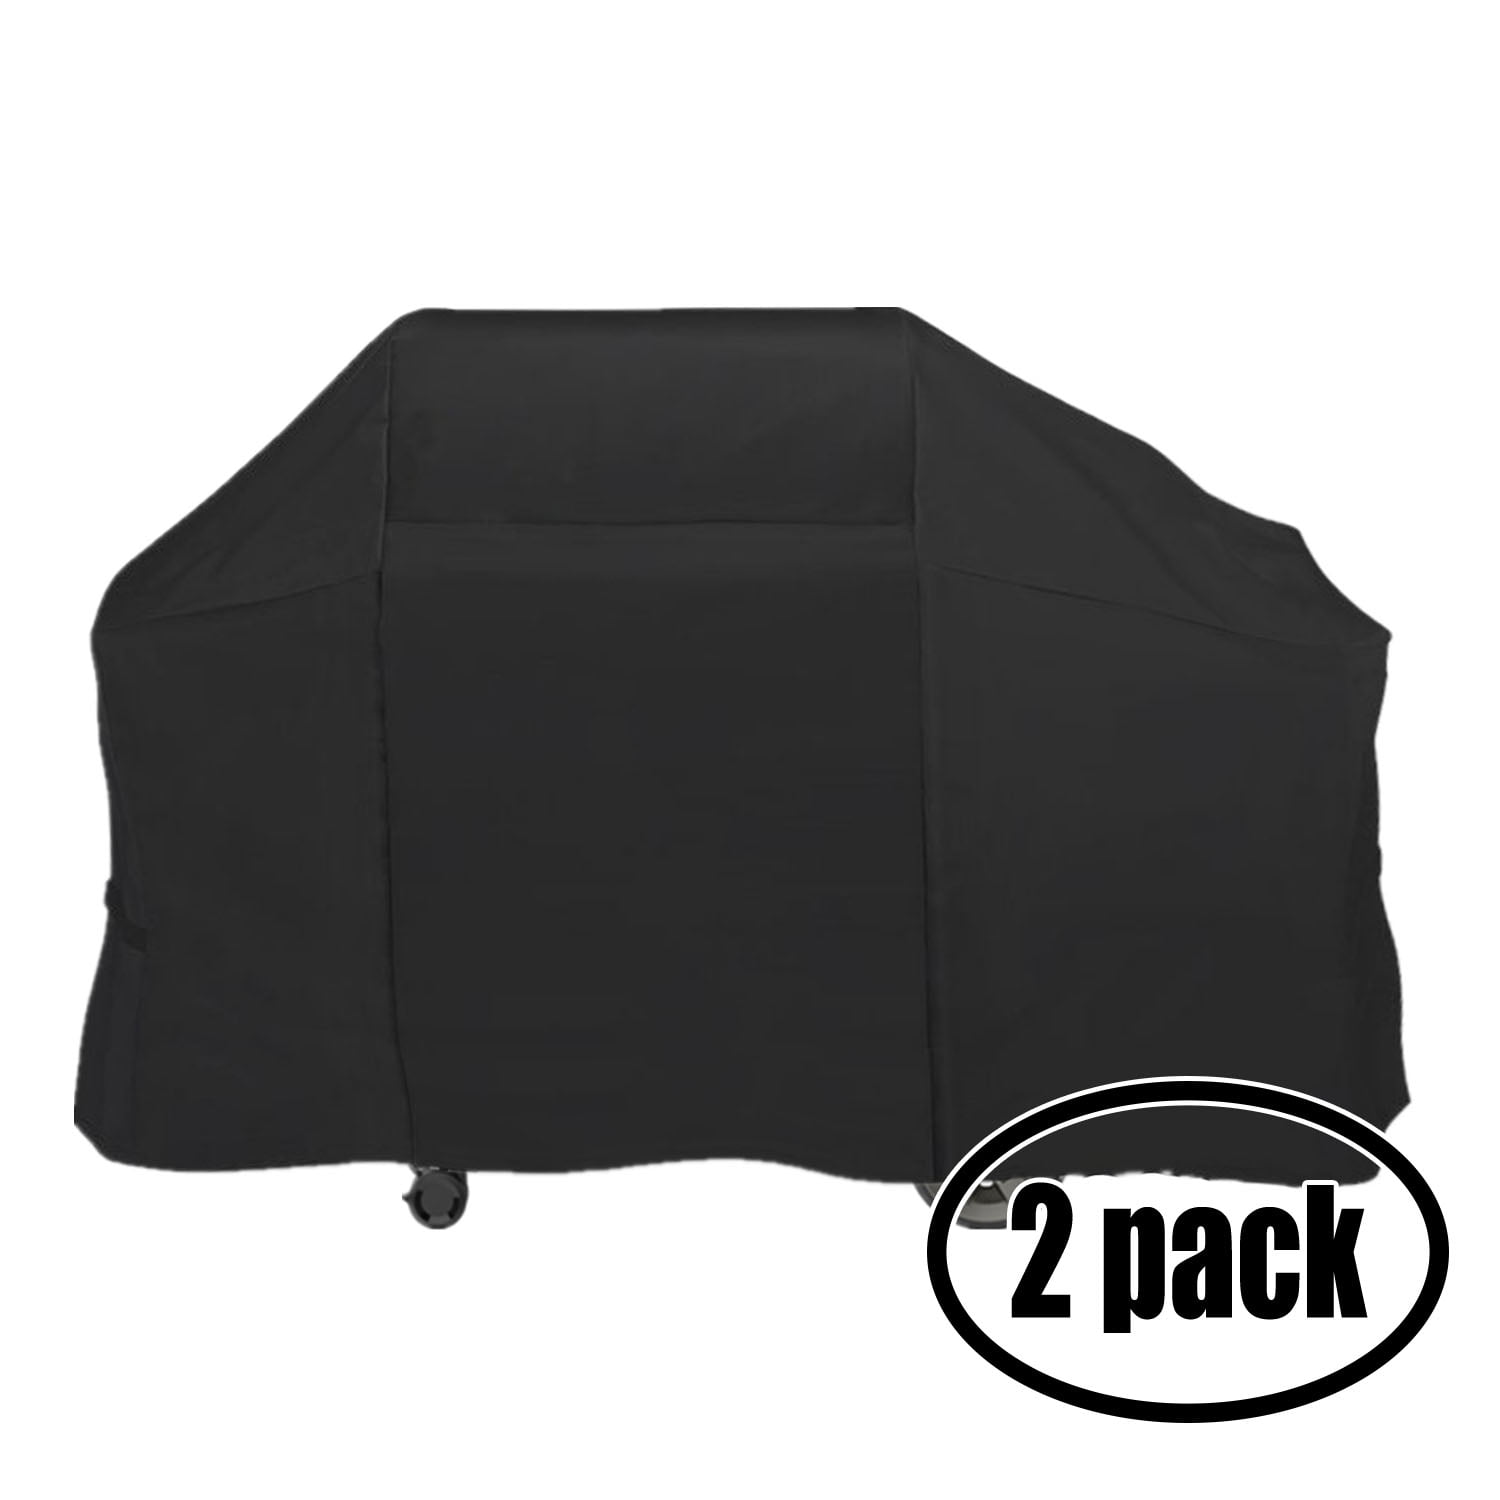 Outdoor Garden BBQ Barbecue Grill Cover Tool Waterproof Dustproof Table Cover C